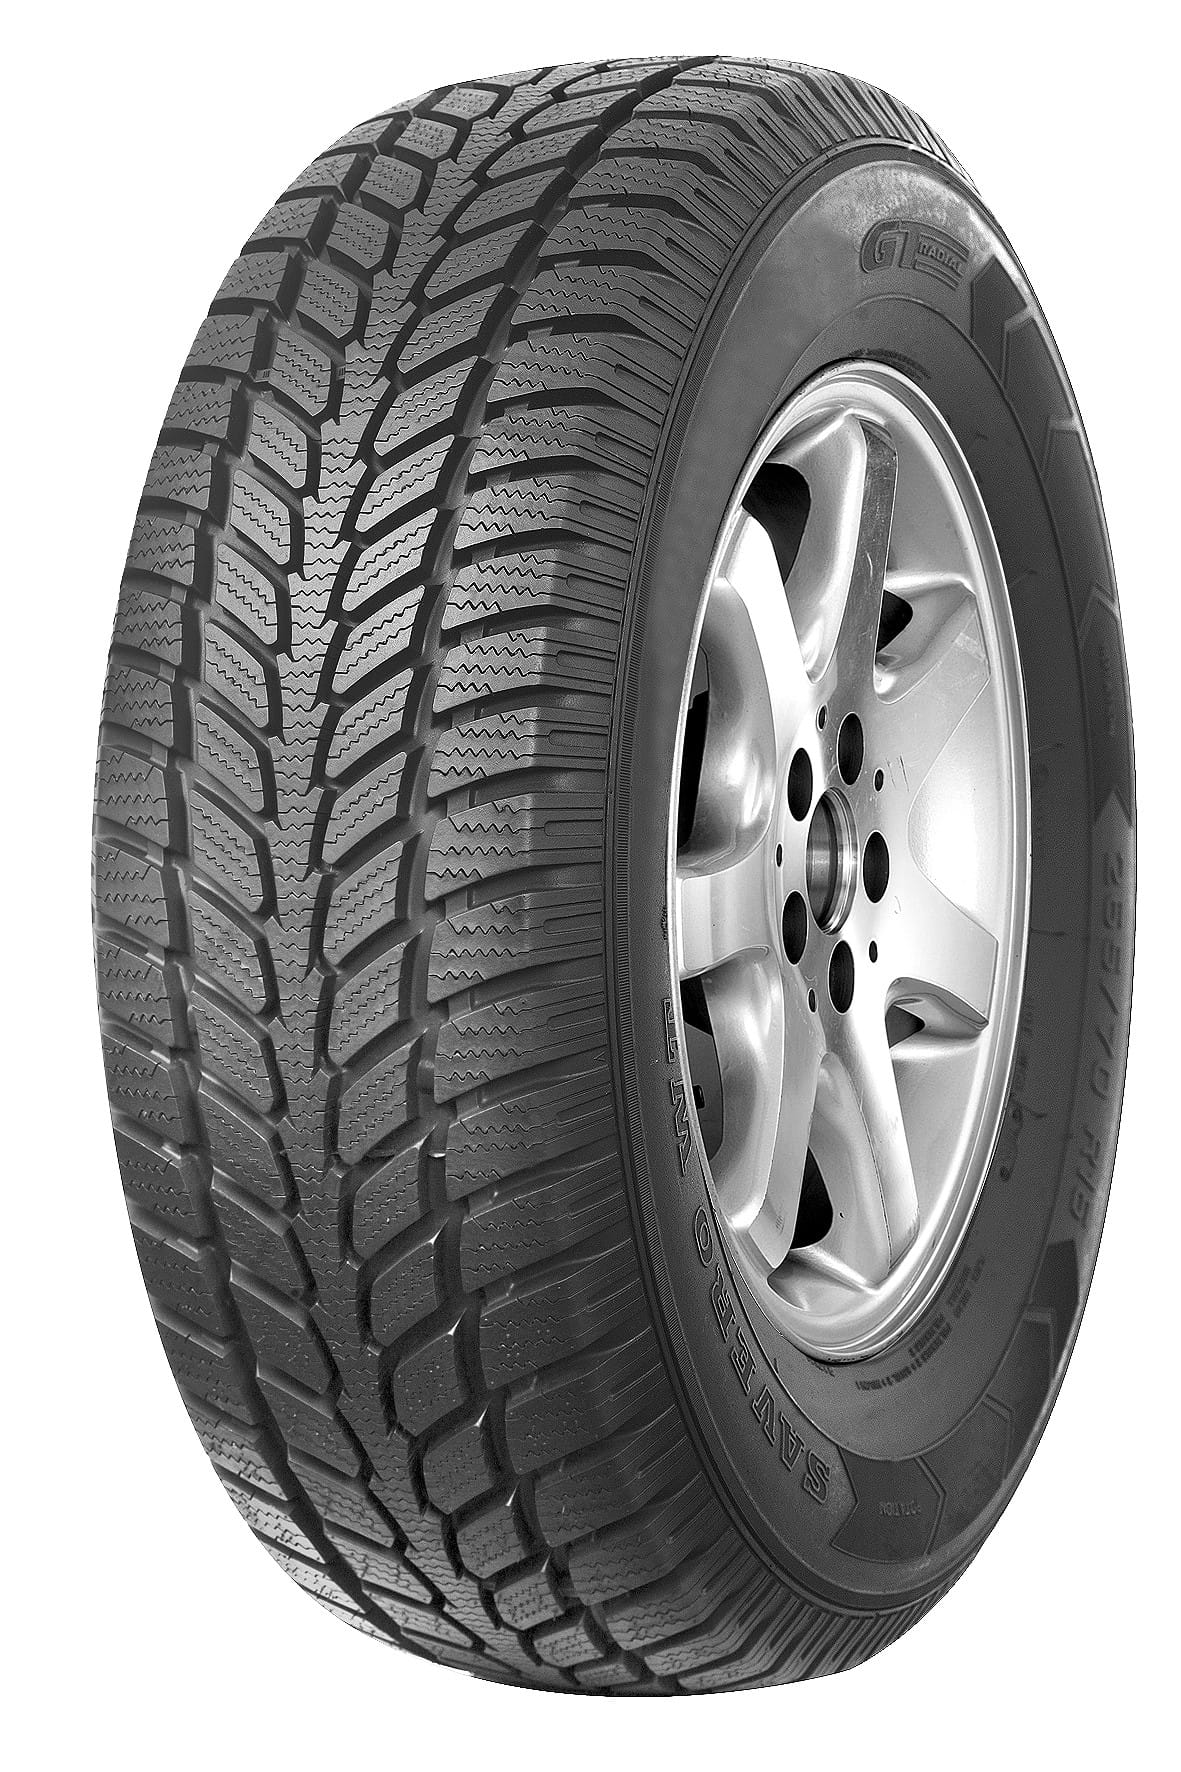 Gomme Nuove GT Radial 225/75 R16 104T Savero WT M+S pneumatici nuovi Invernale